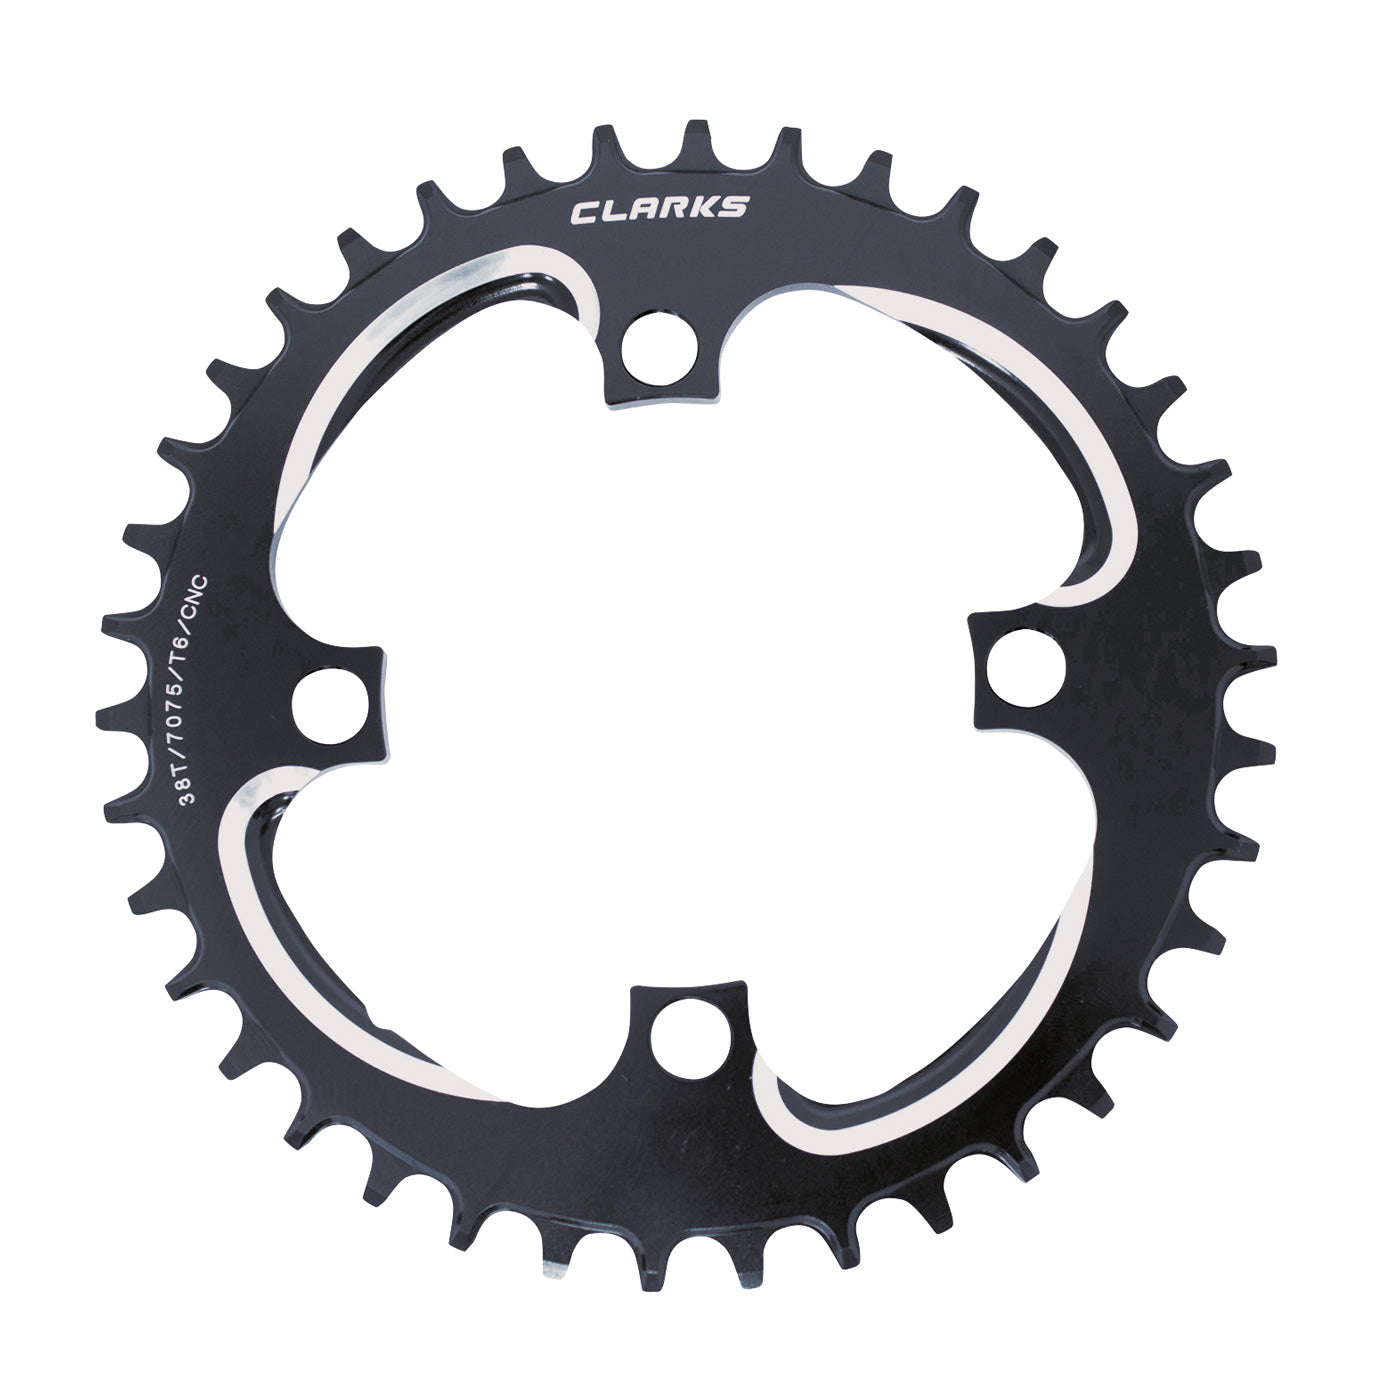 View 4 Bolt Alloy chainring 94BCD 30t information